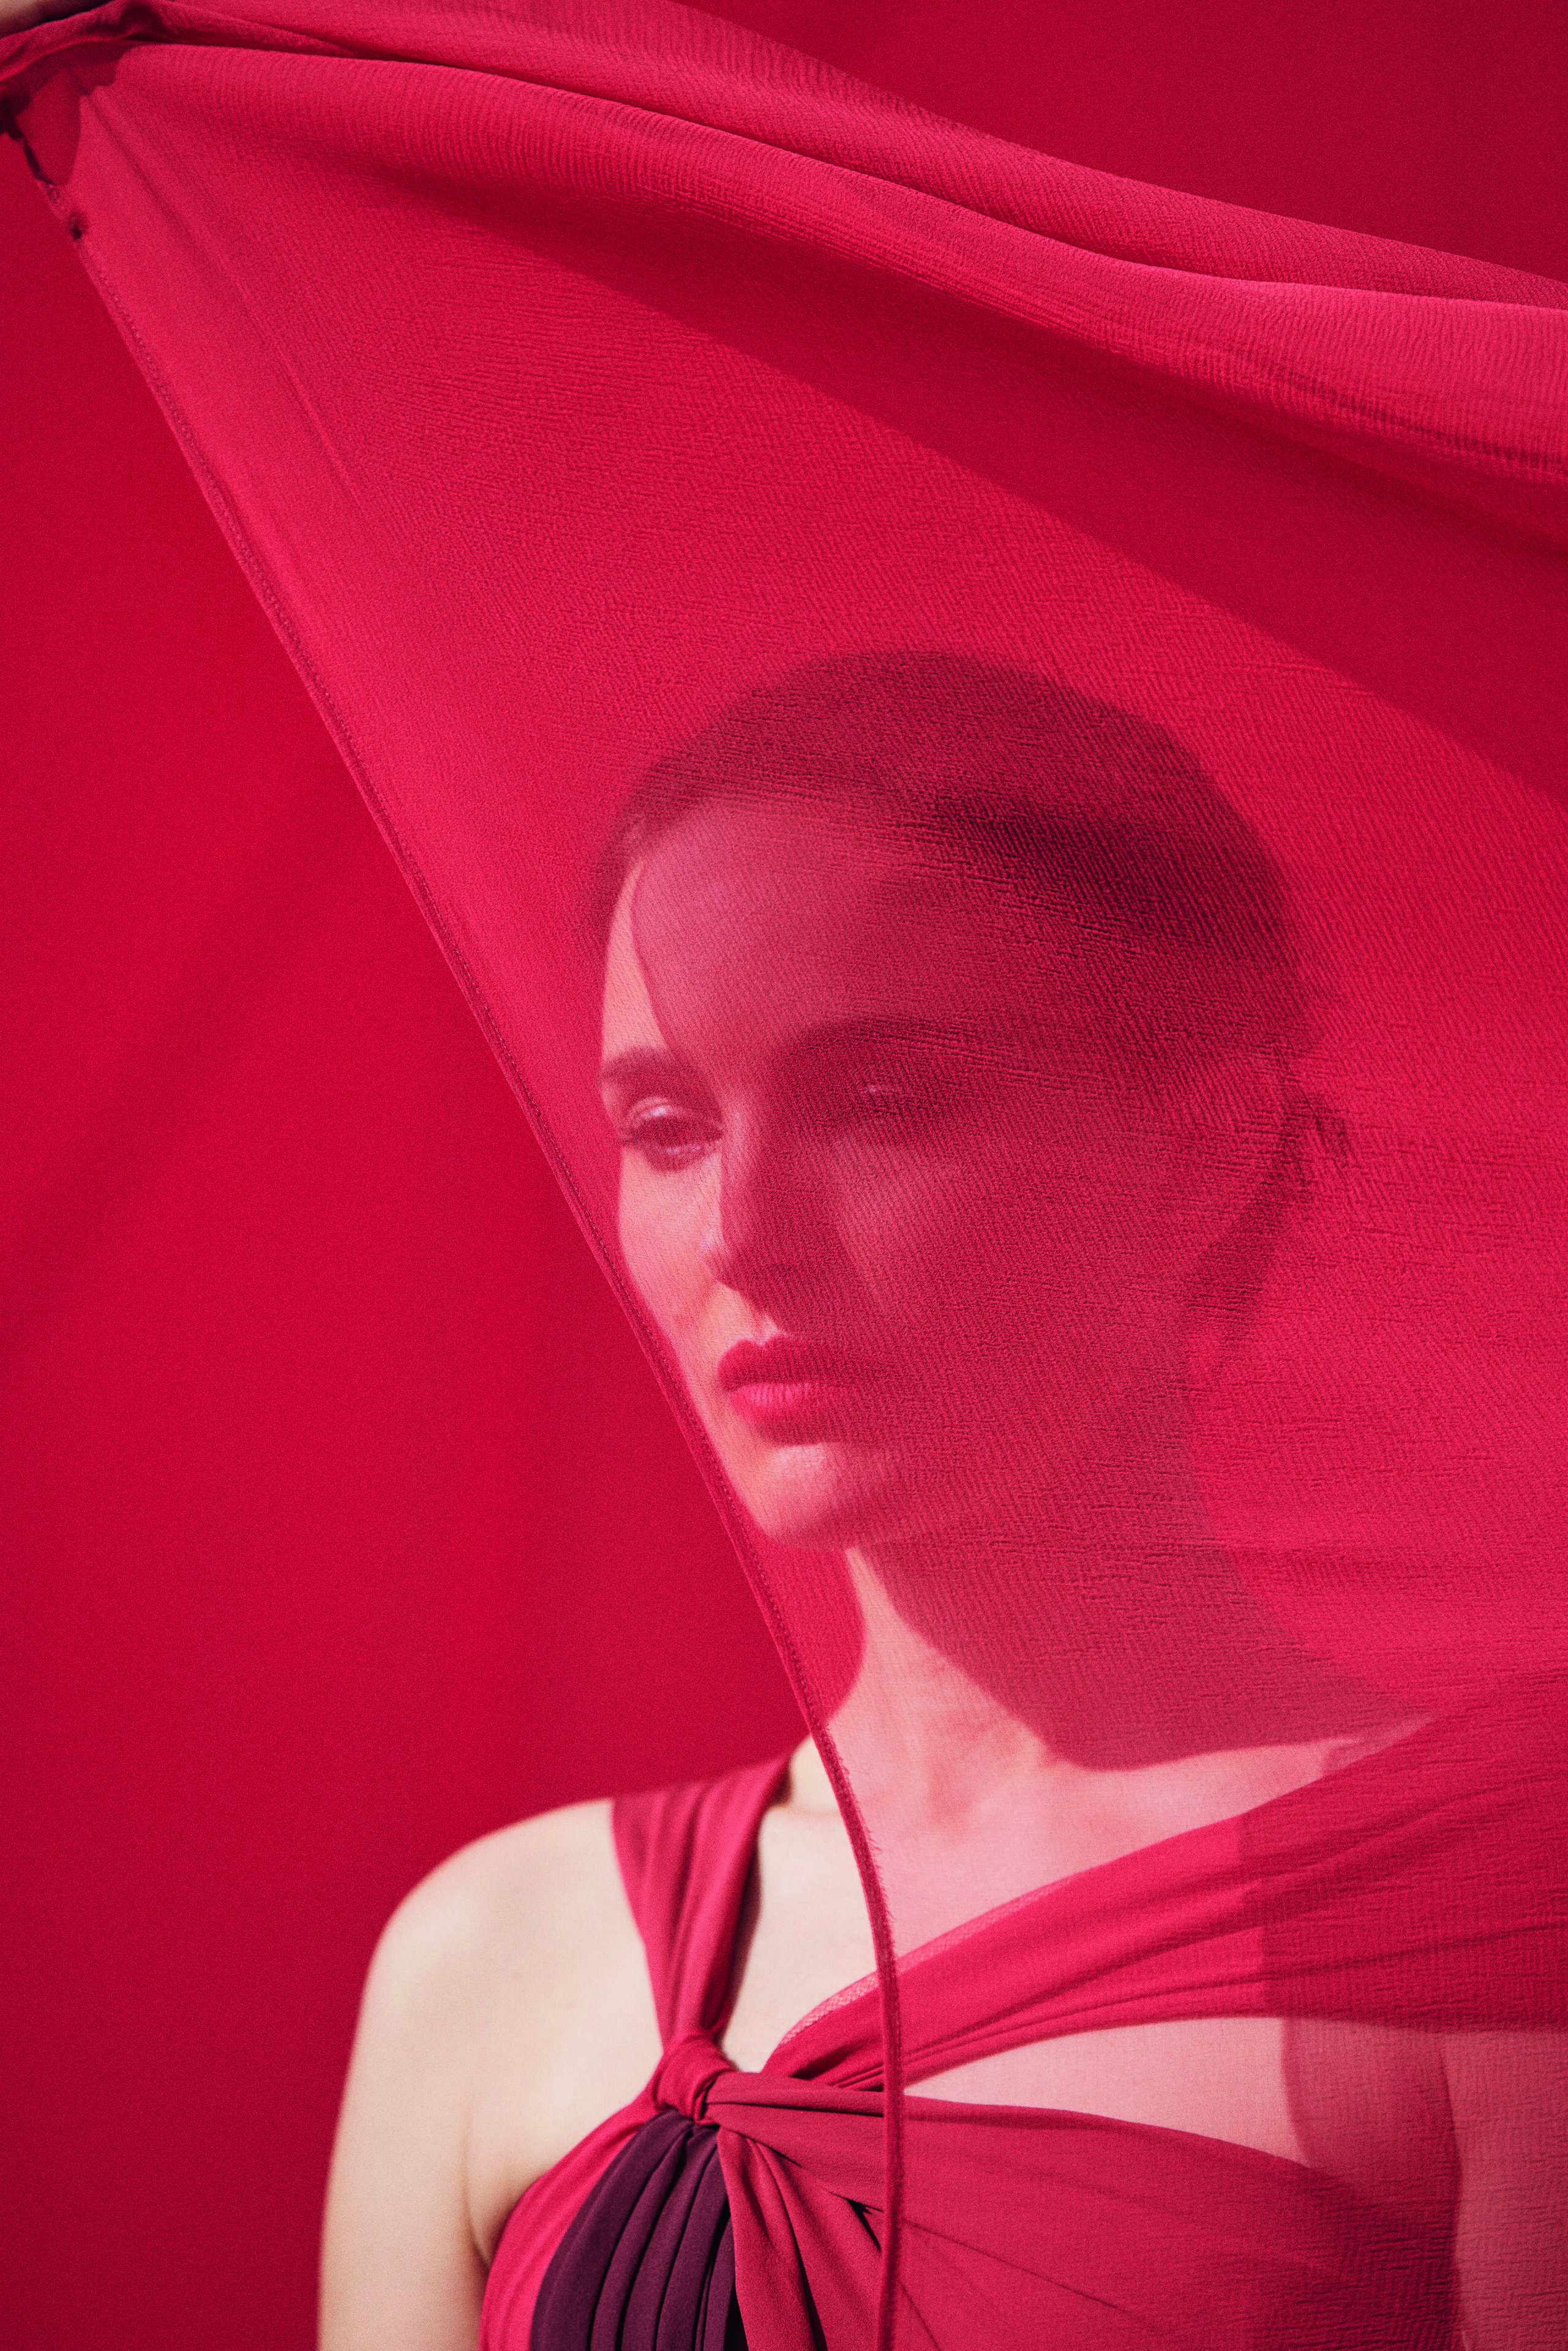 Natalie Portman and Yara Shahidi Front New Rouge Dior Forever Campaign   Anne of Carversville